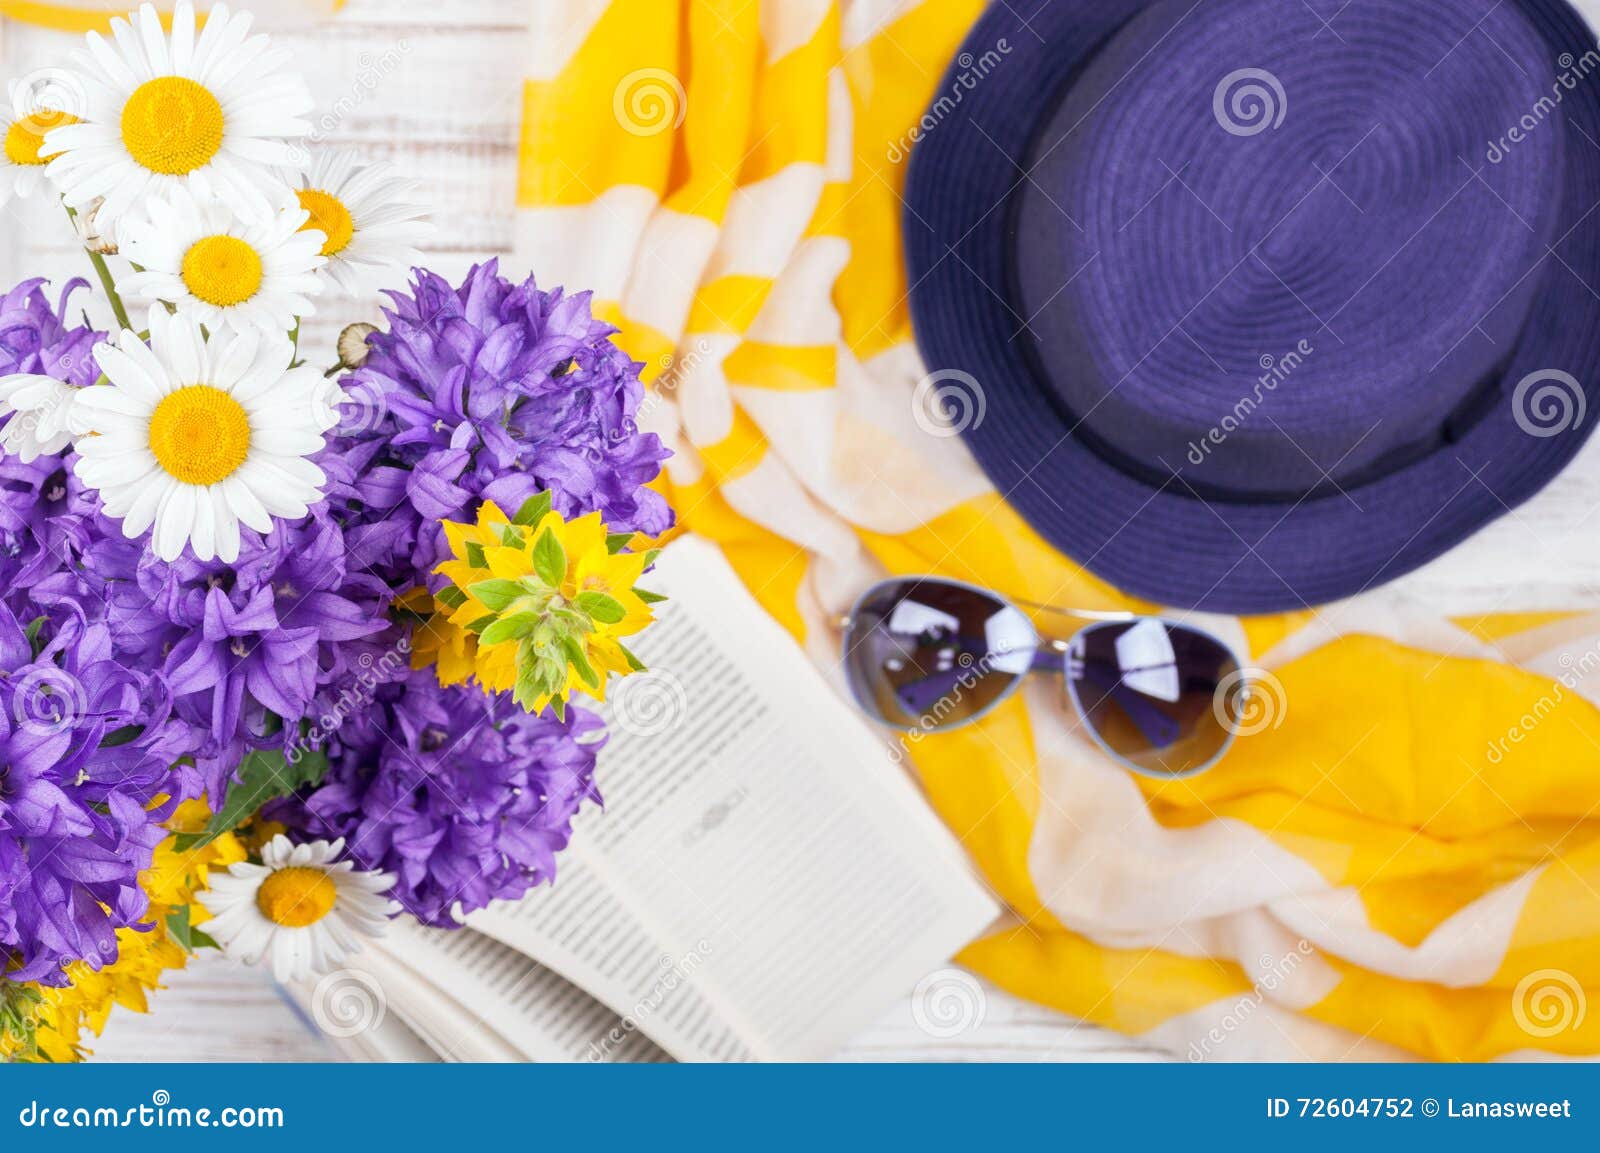 summer background with flowers, book and womans accessories